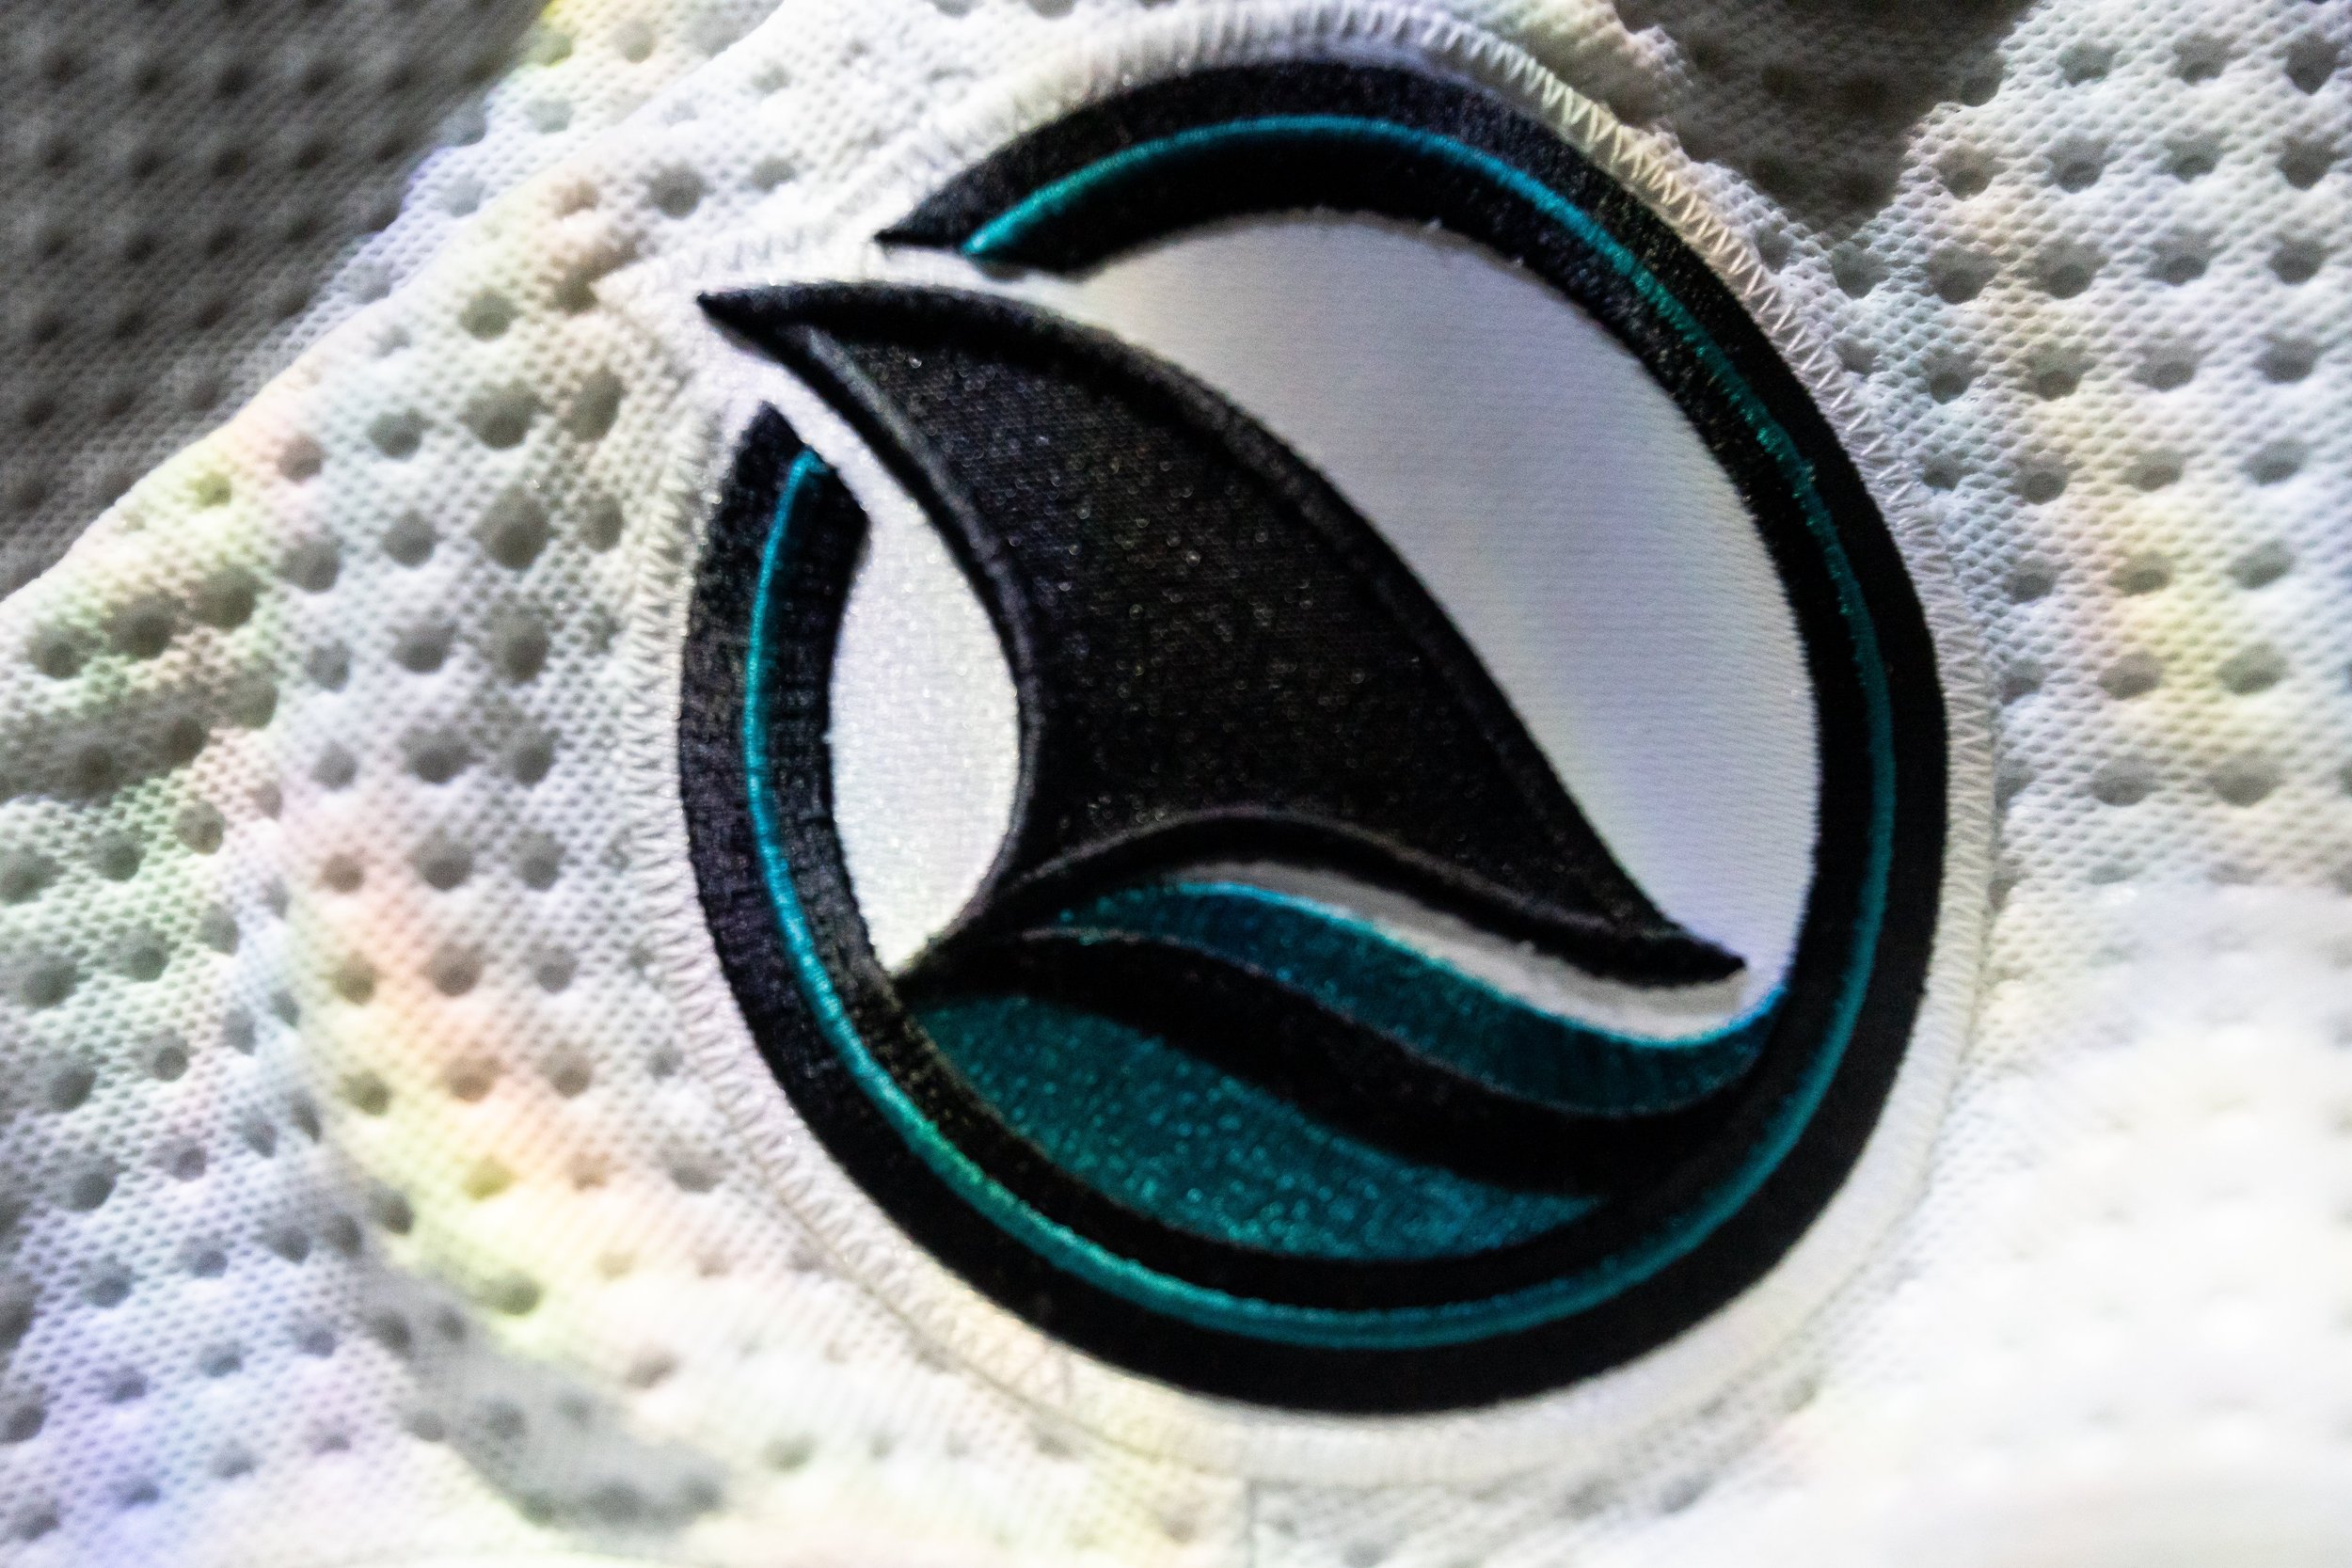 San Jose Sharks to have new uniforms this season or next, per report, Sports